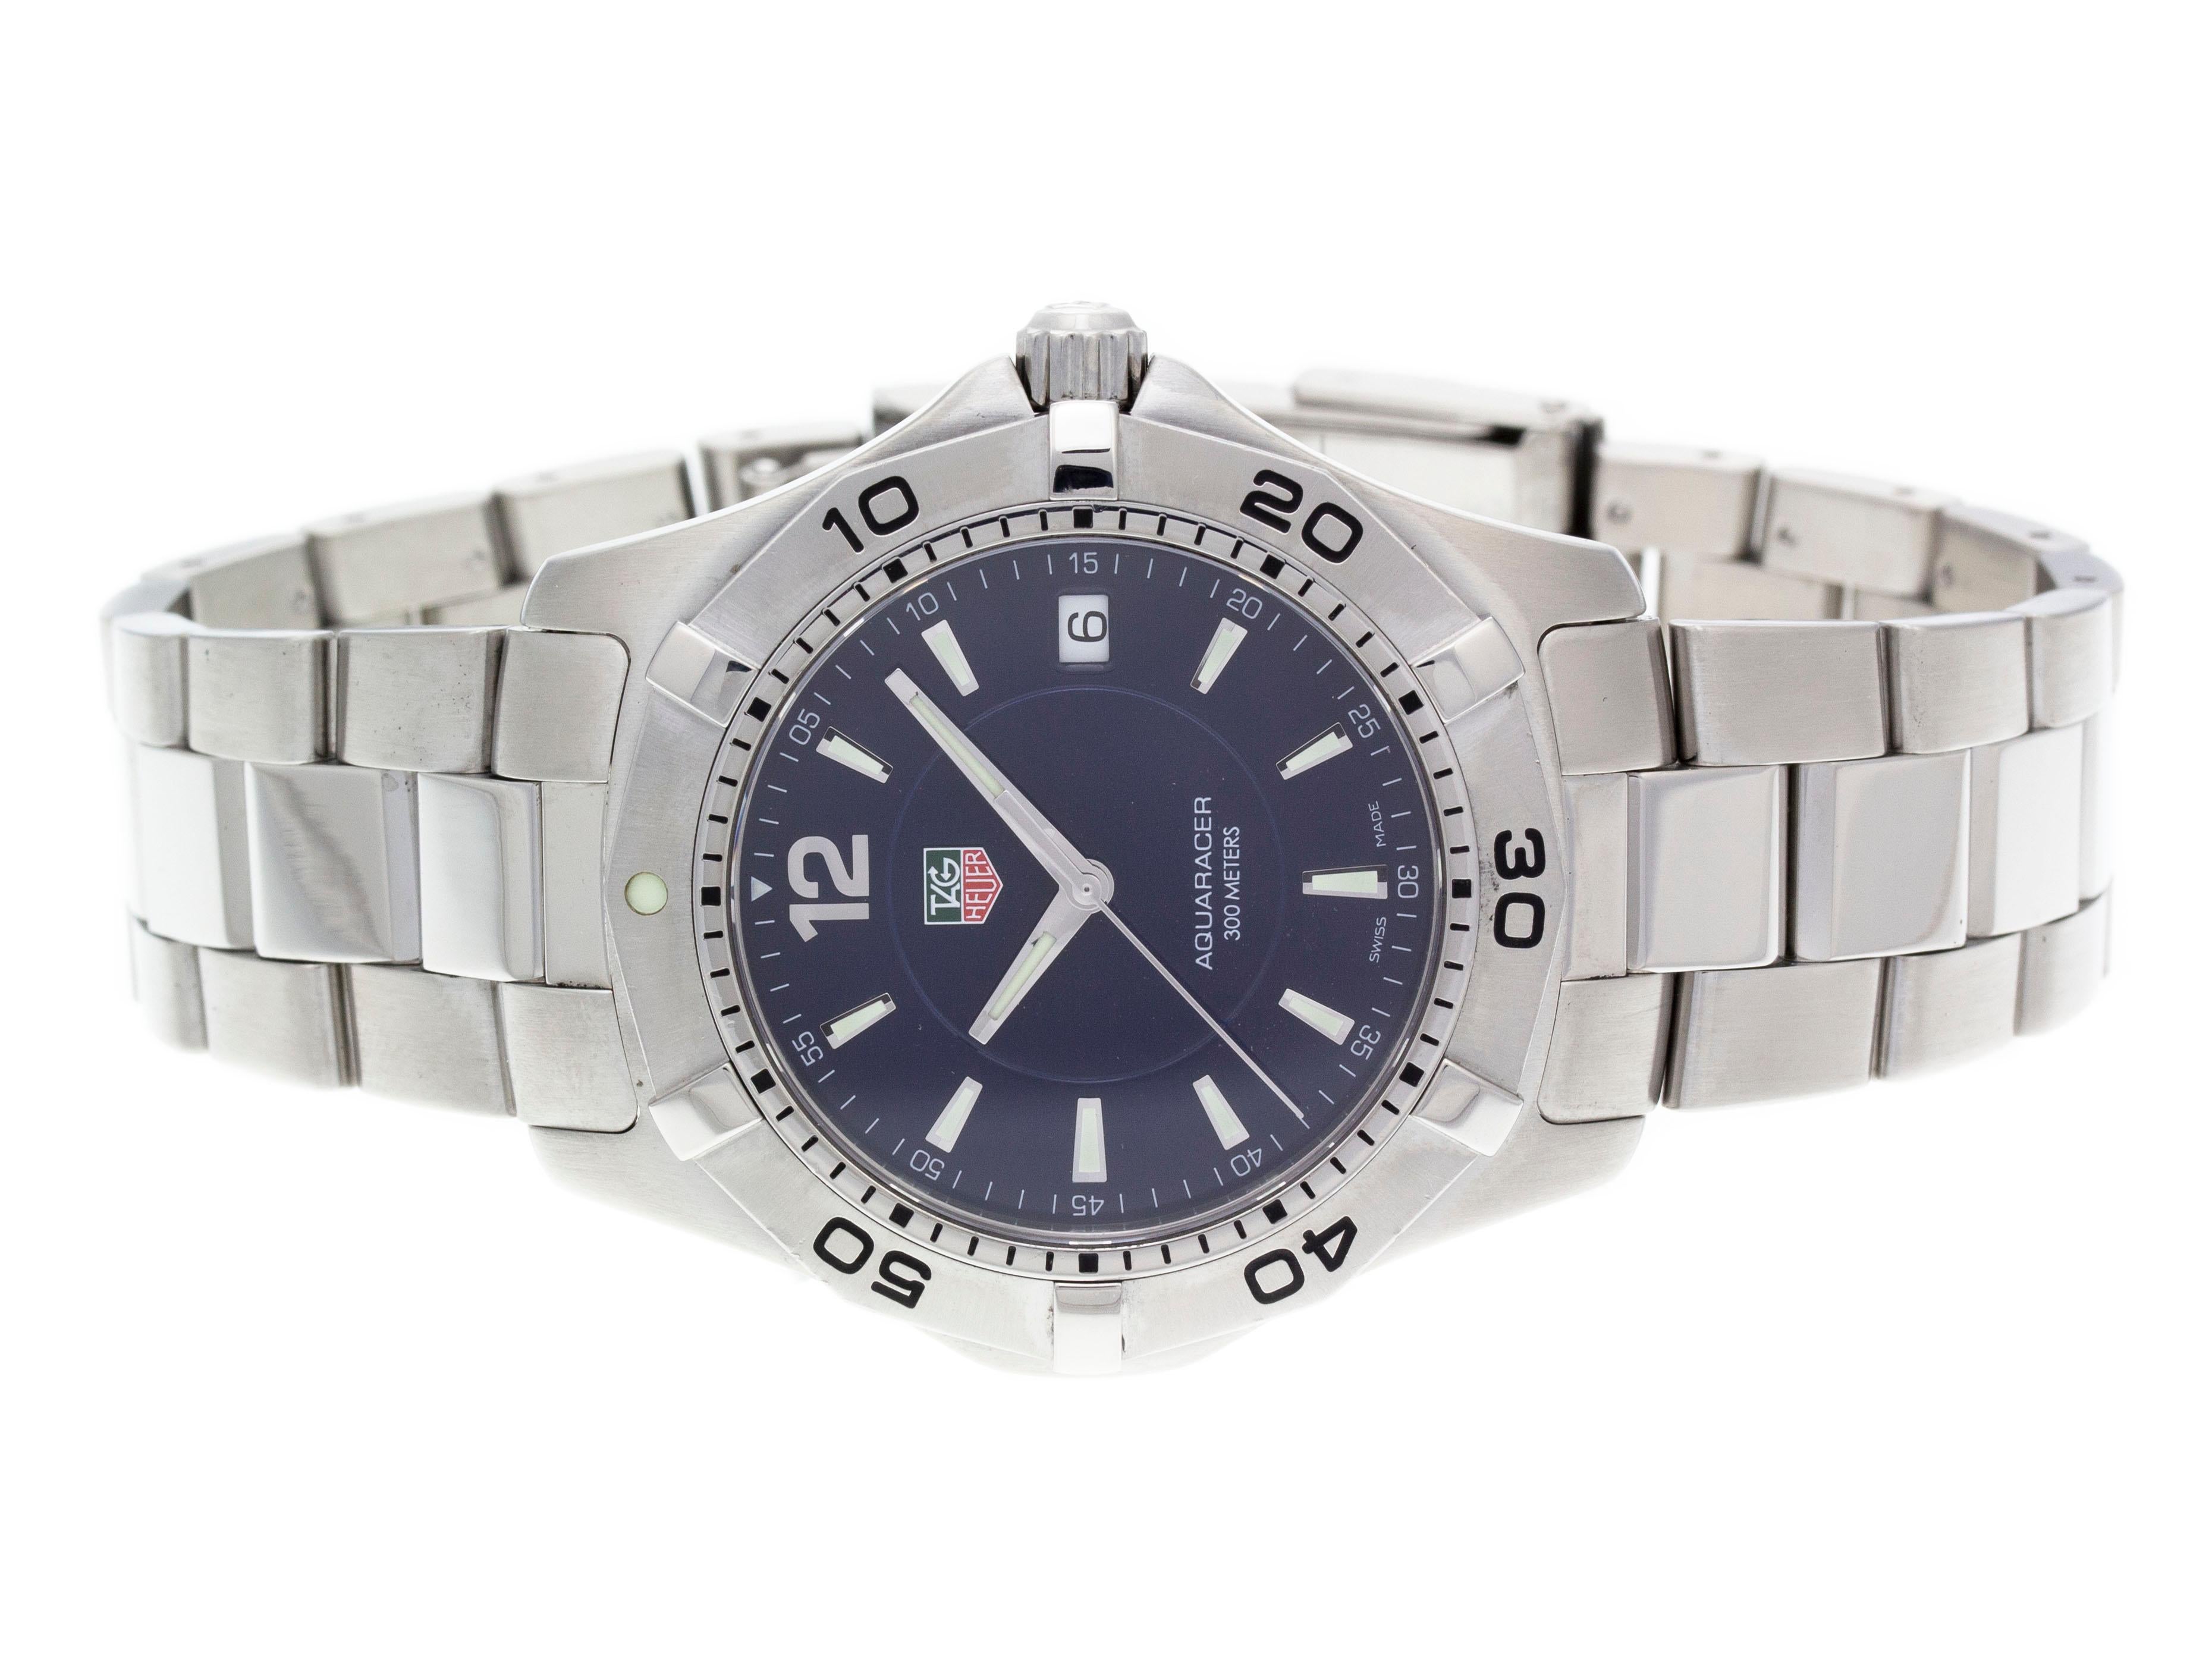 Stainless steel Tag Heuer Aquaracer 2000 quartz watch with a 38.4mm case, navy blue dial, and bracelet with folding clasp. Features include hours, minutes, seconds and date. Comes with a Gift Box and 2 Year Store Warranty.​

Brand	Tag